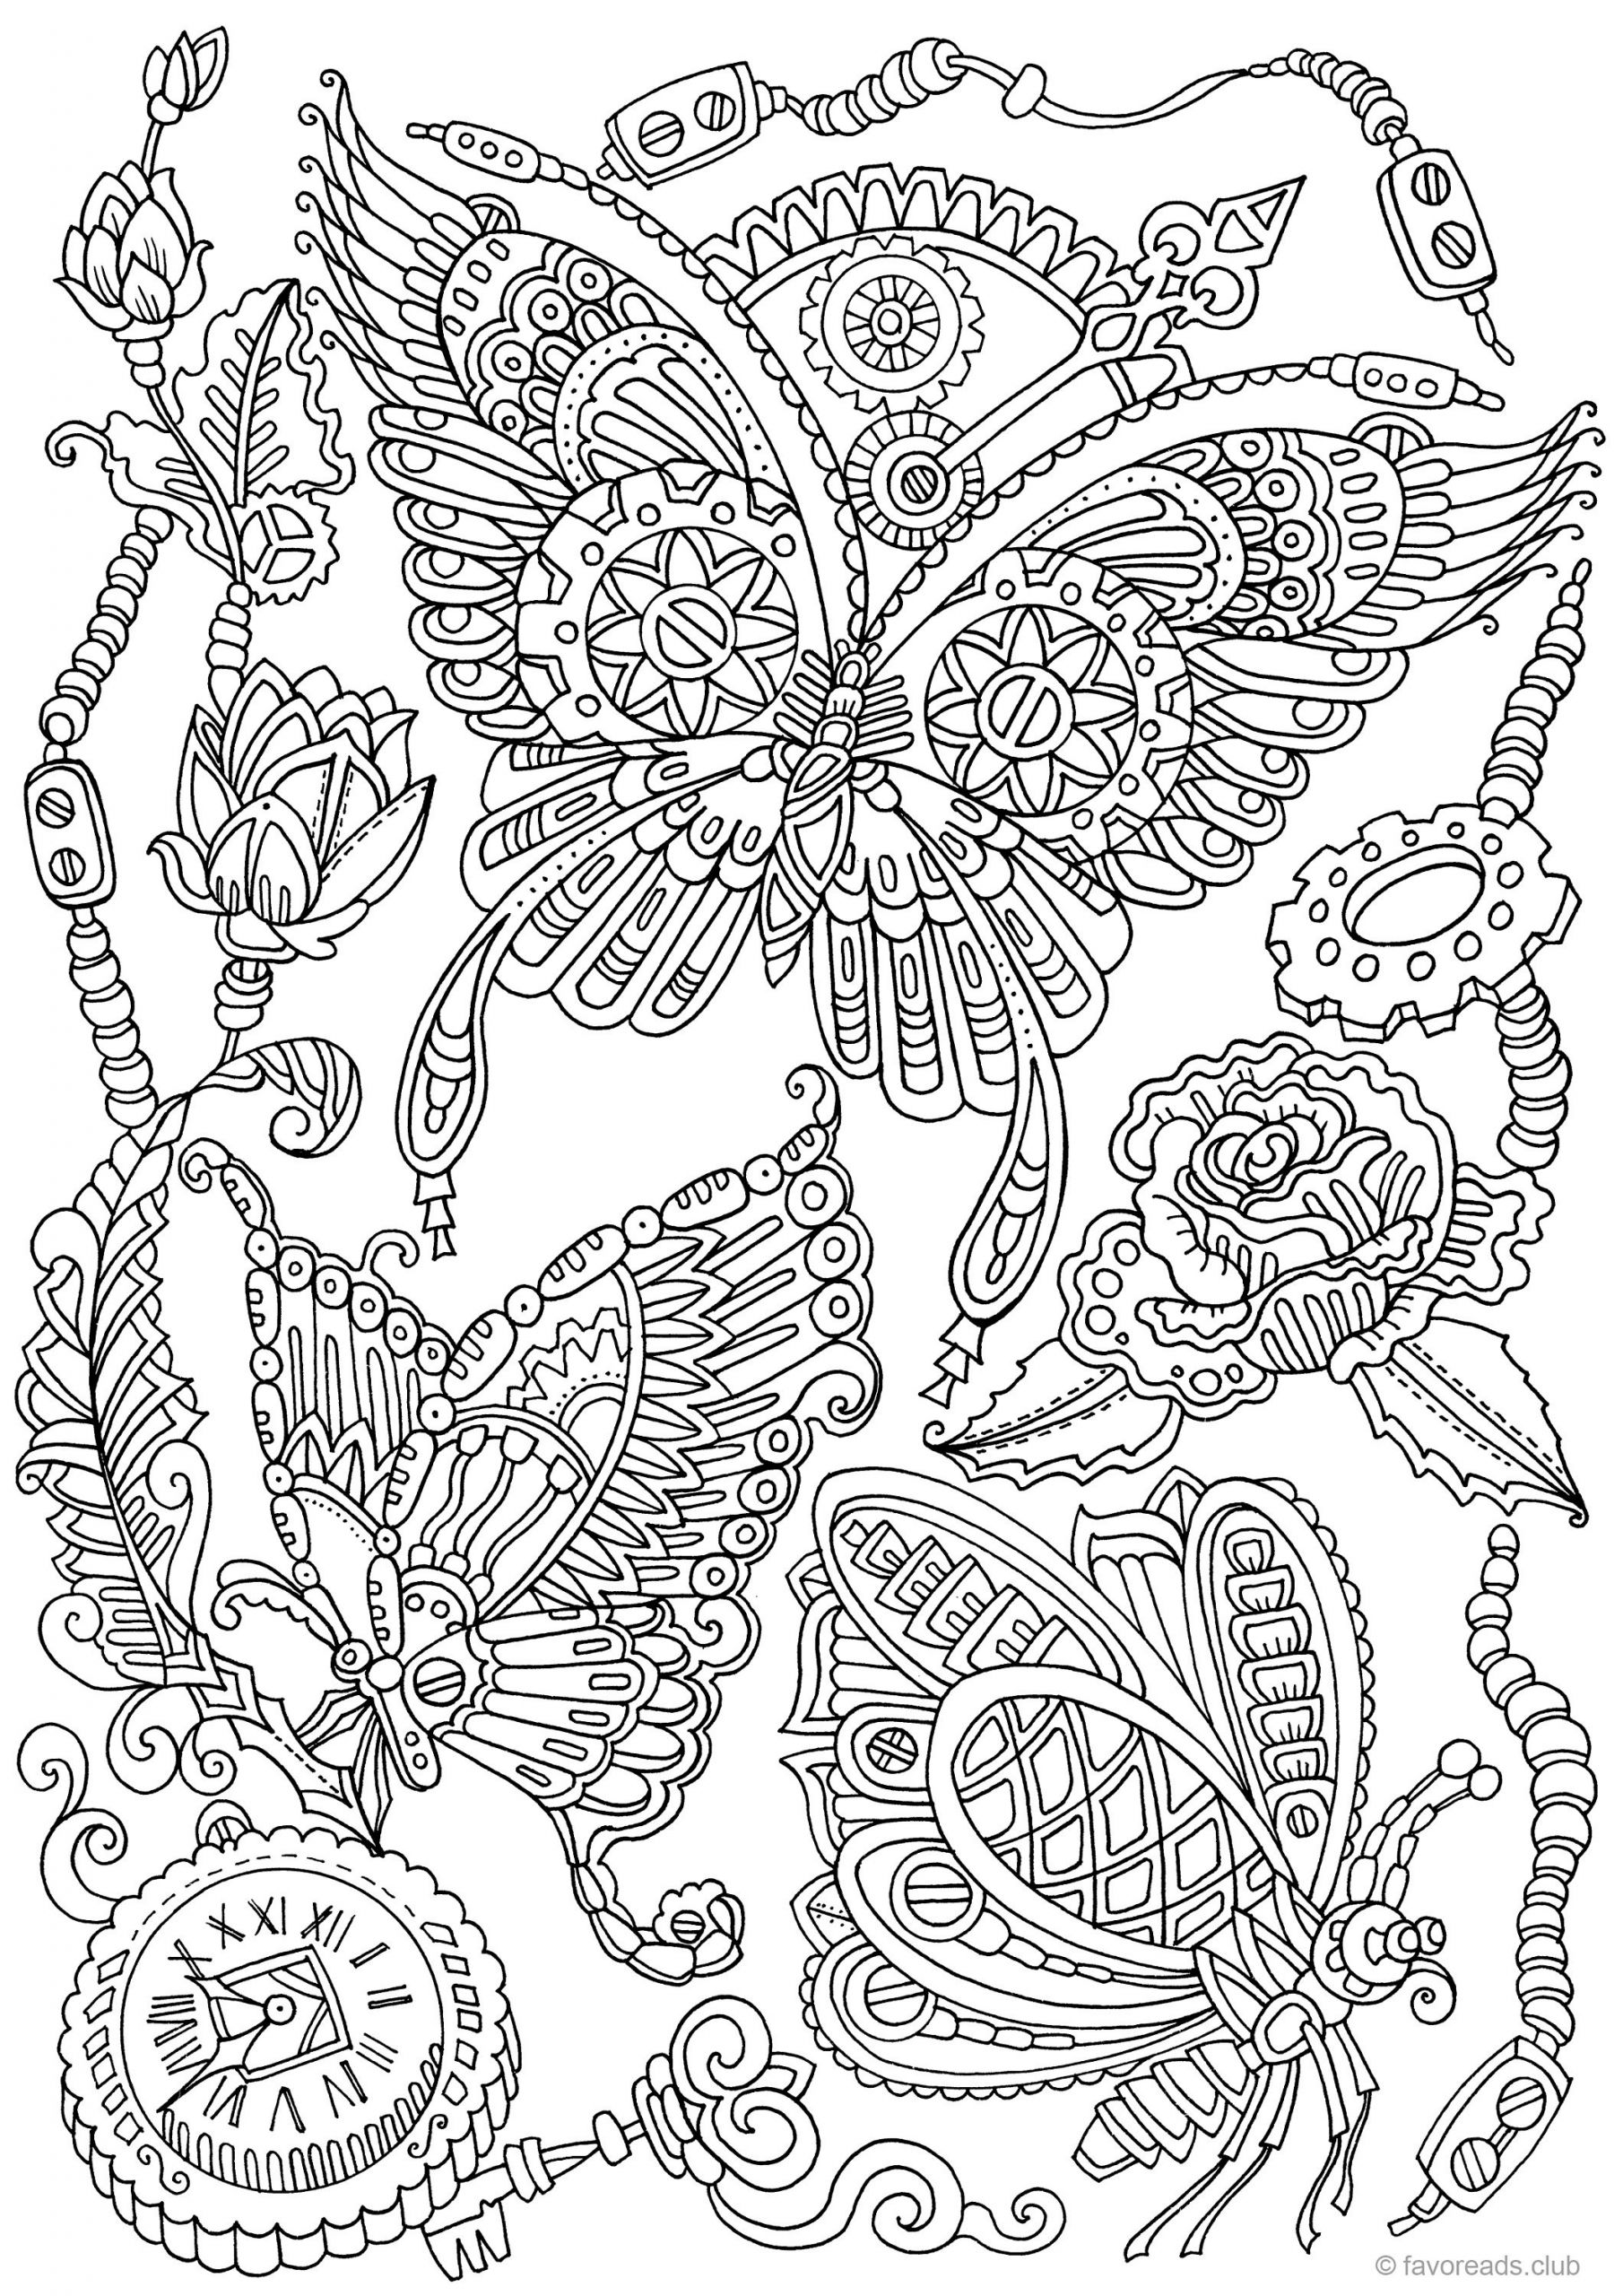 Free Adult Coloring Pages Printable
 Steampunk Butterflies Printable Adult Coloring Page from